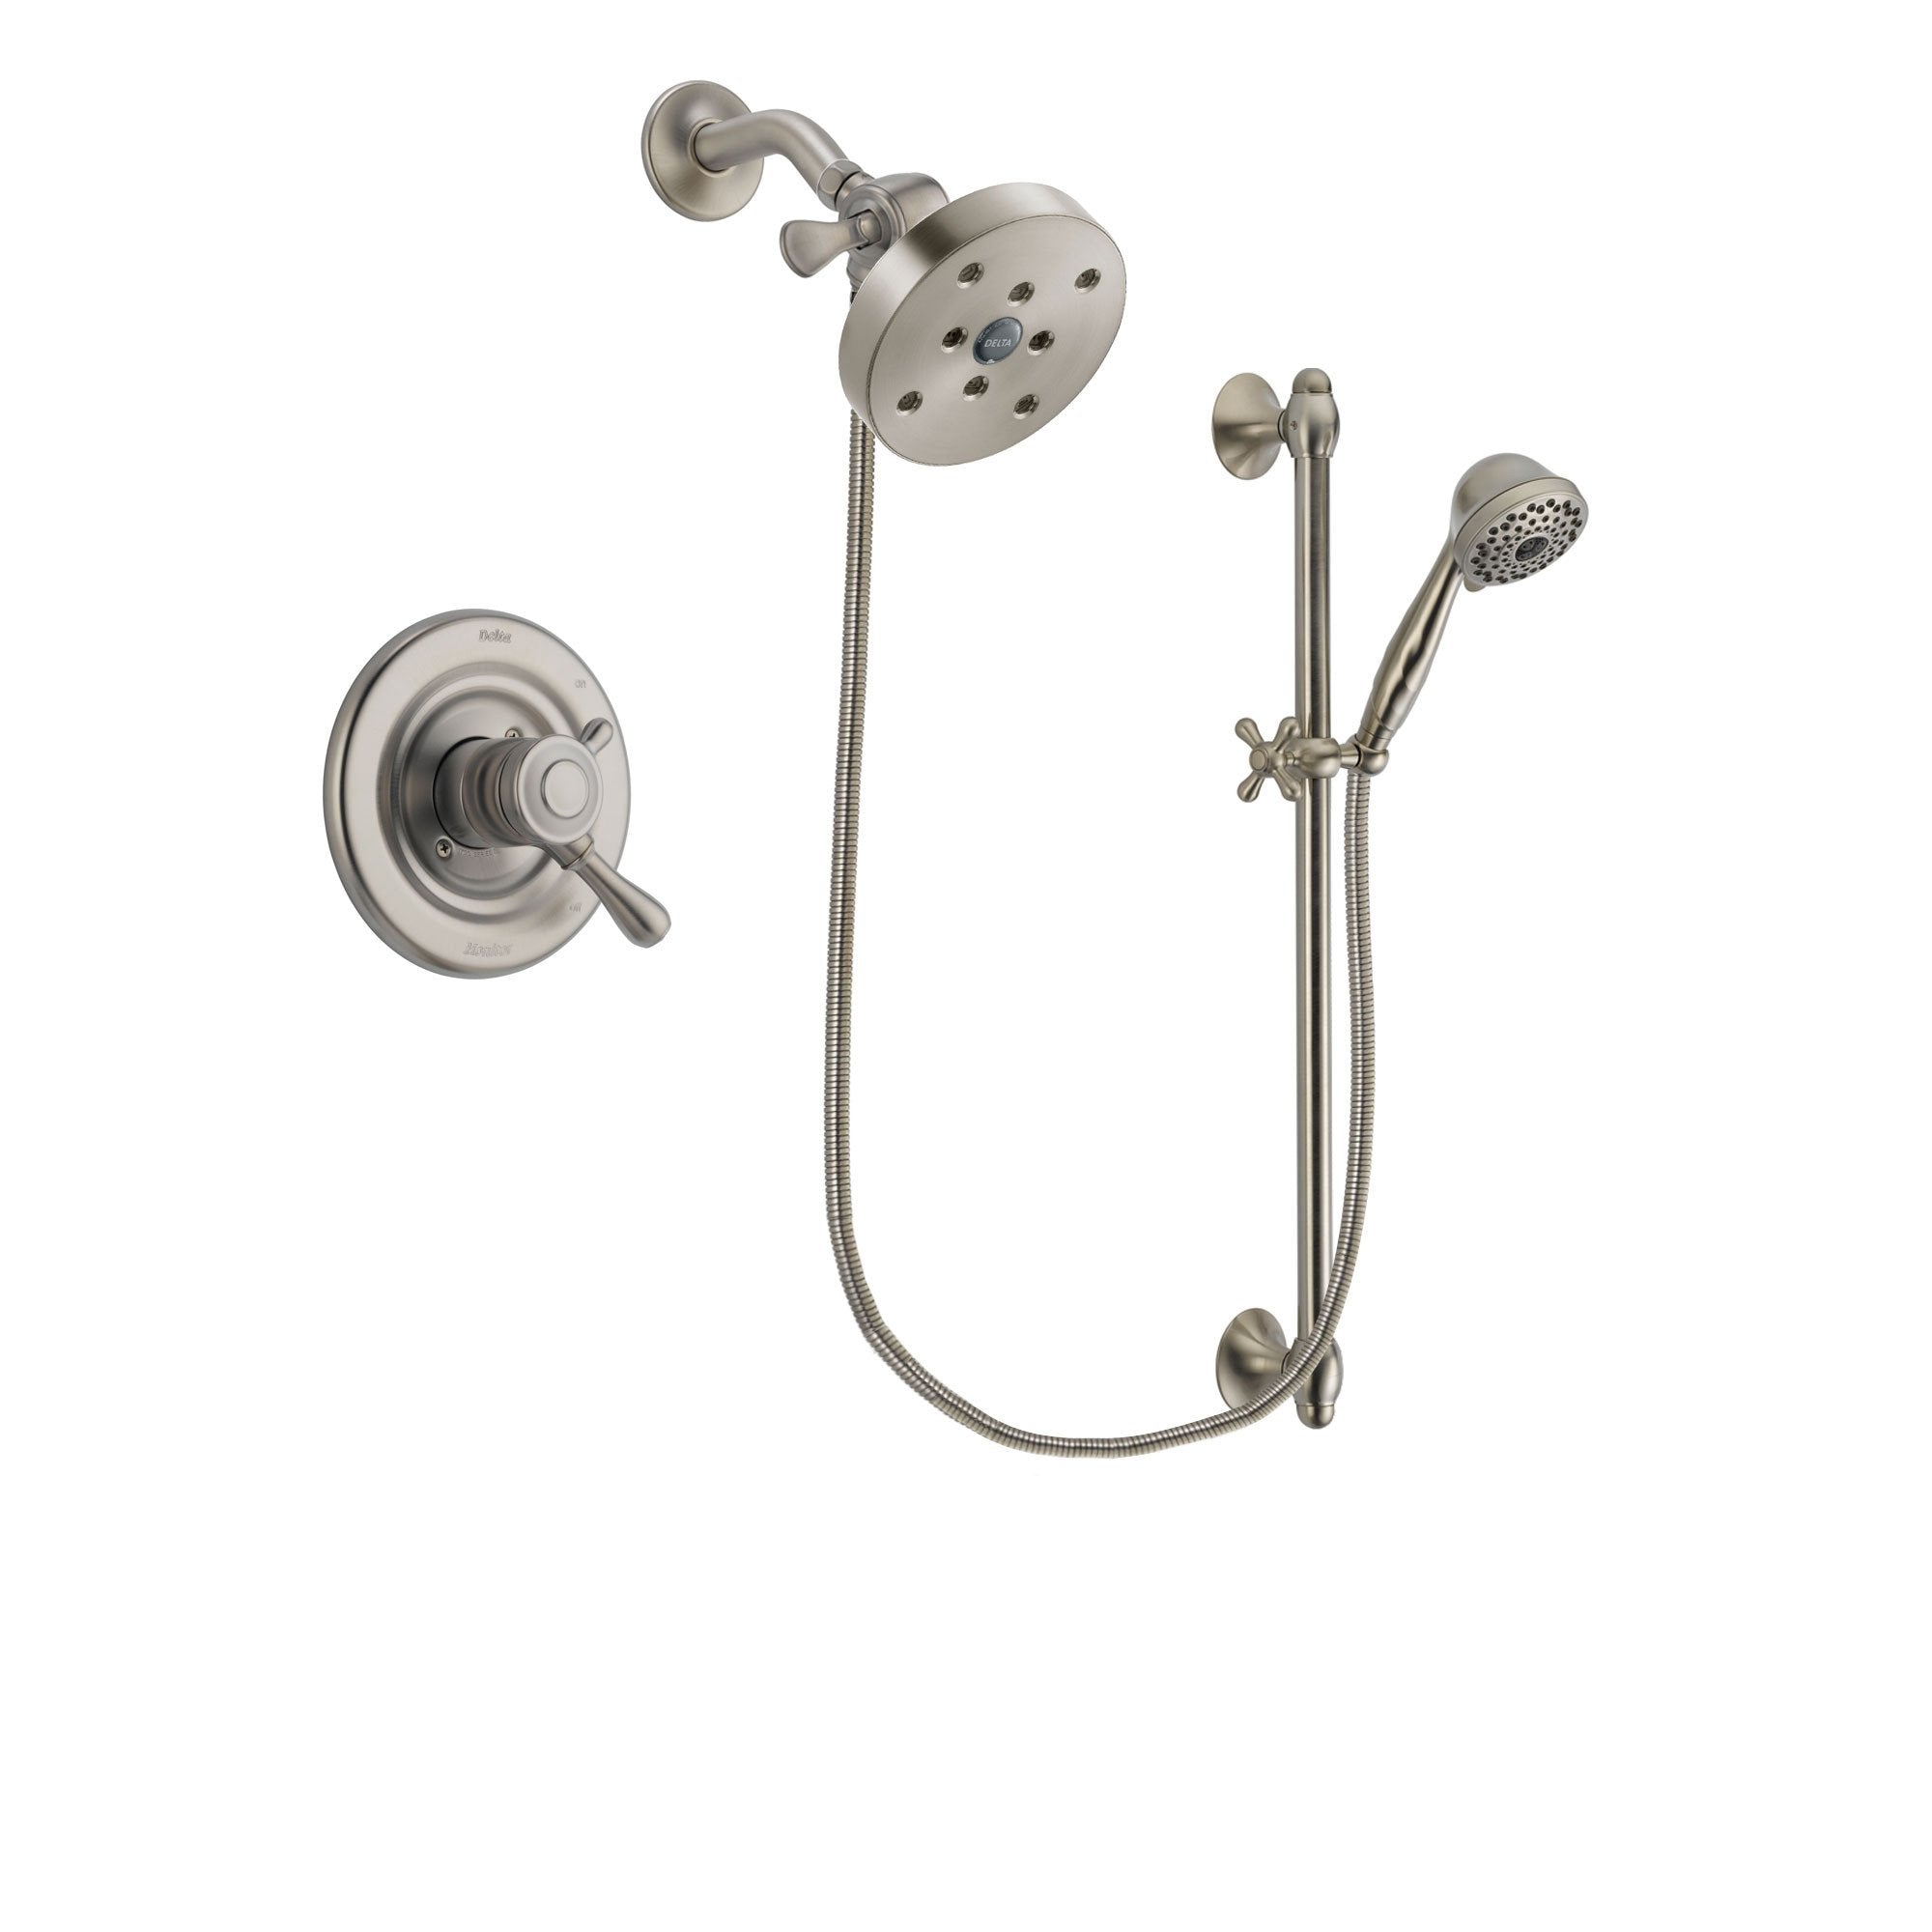 Delta Leland Stainless Steel Finish Shower Faucet System w/ Hand Spray DSP1778V